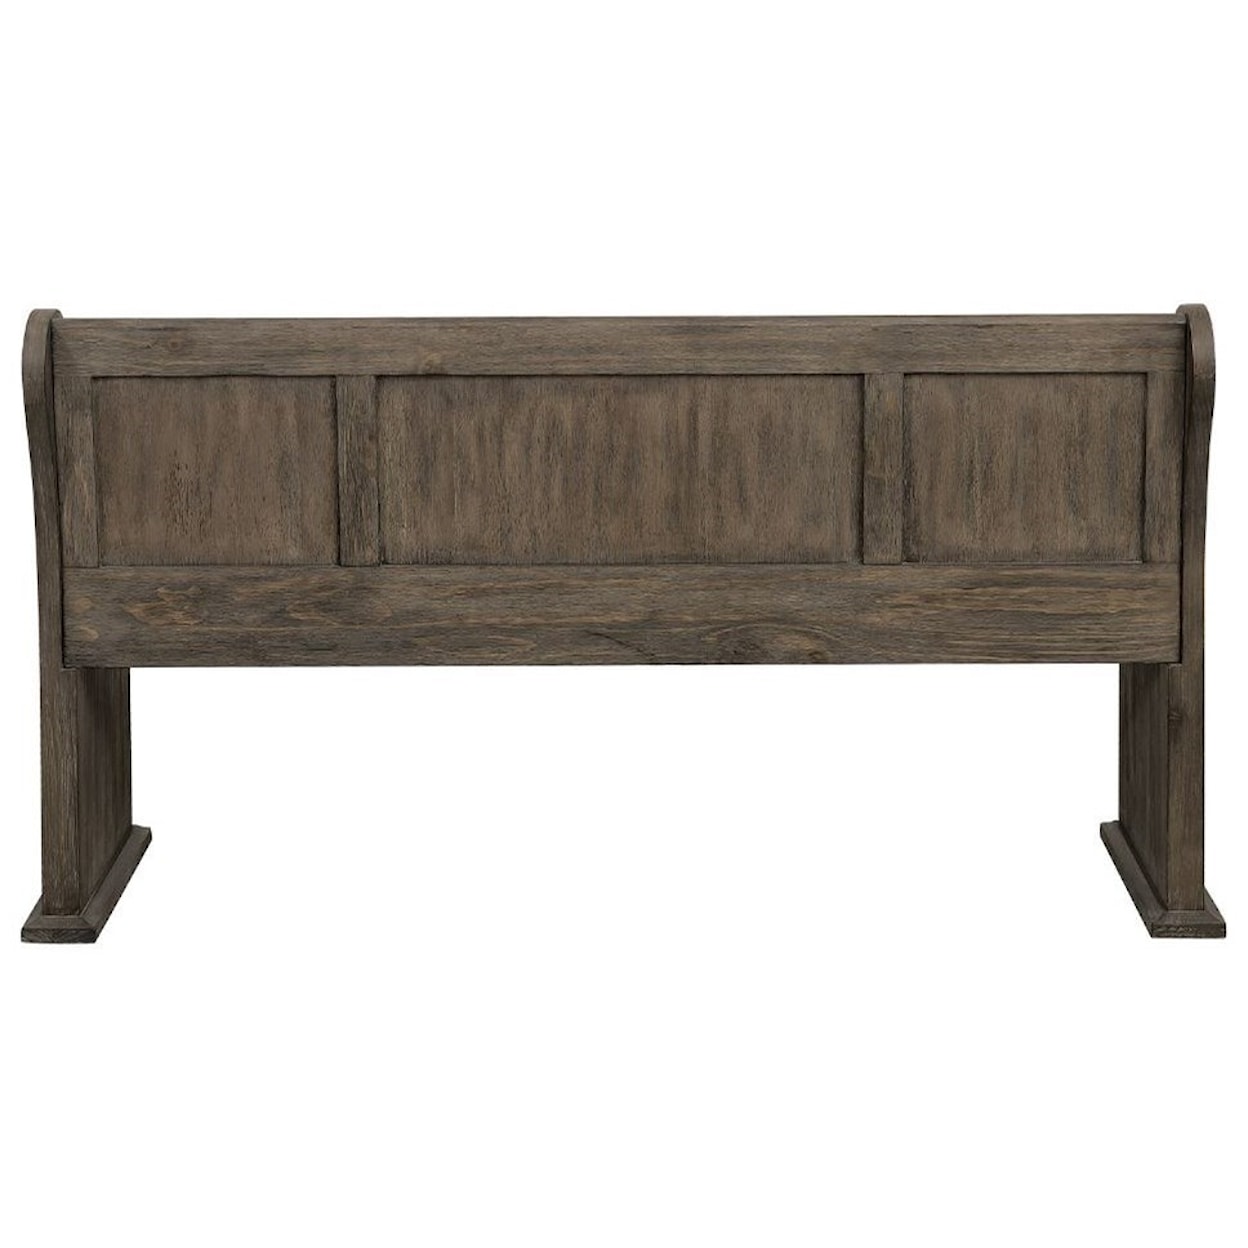 Homelegance Toulon Bench with Curved Arms